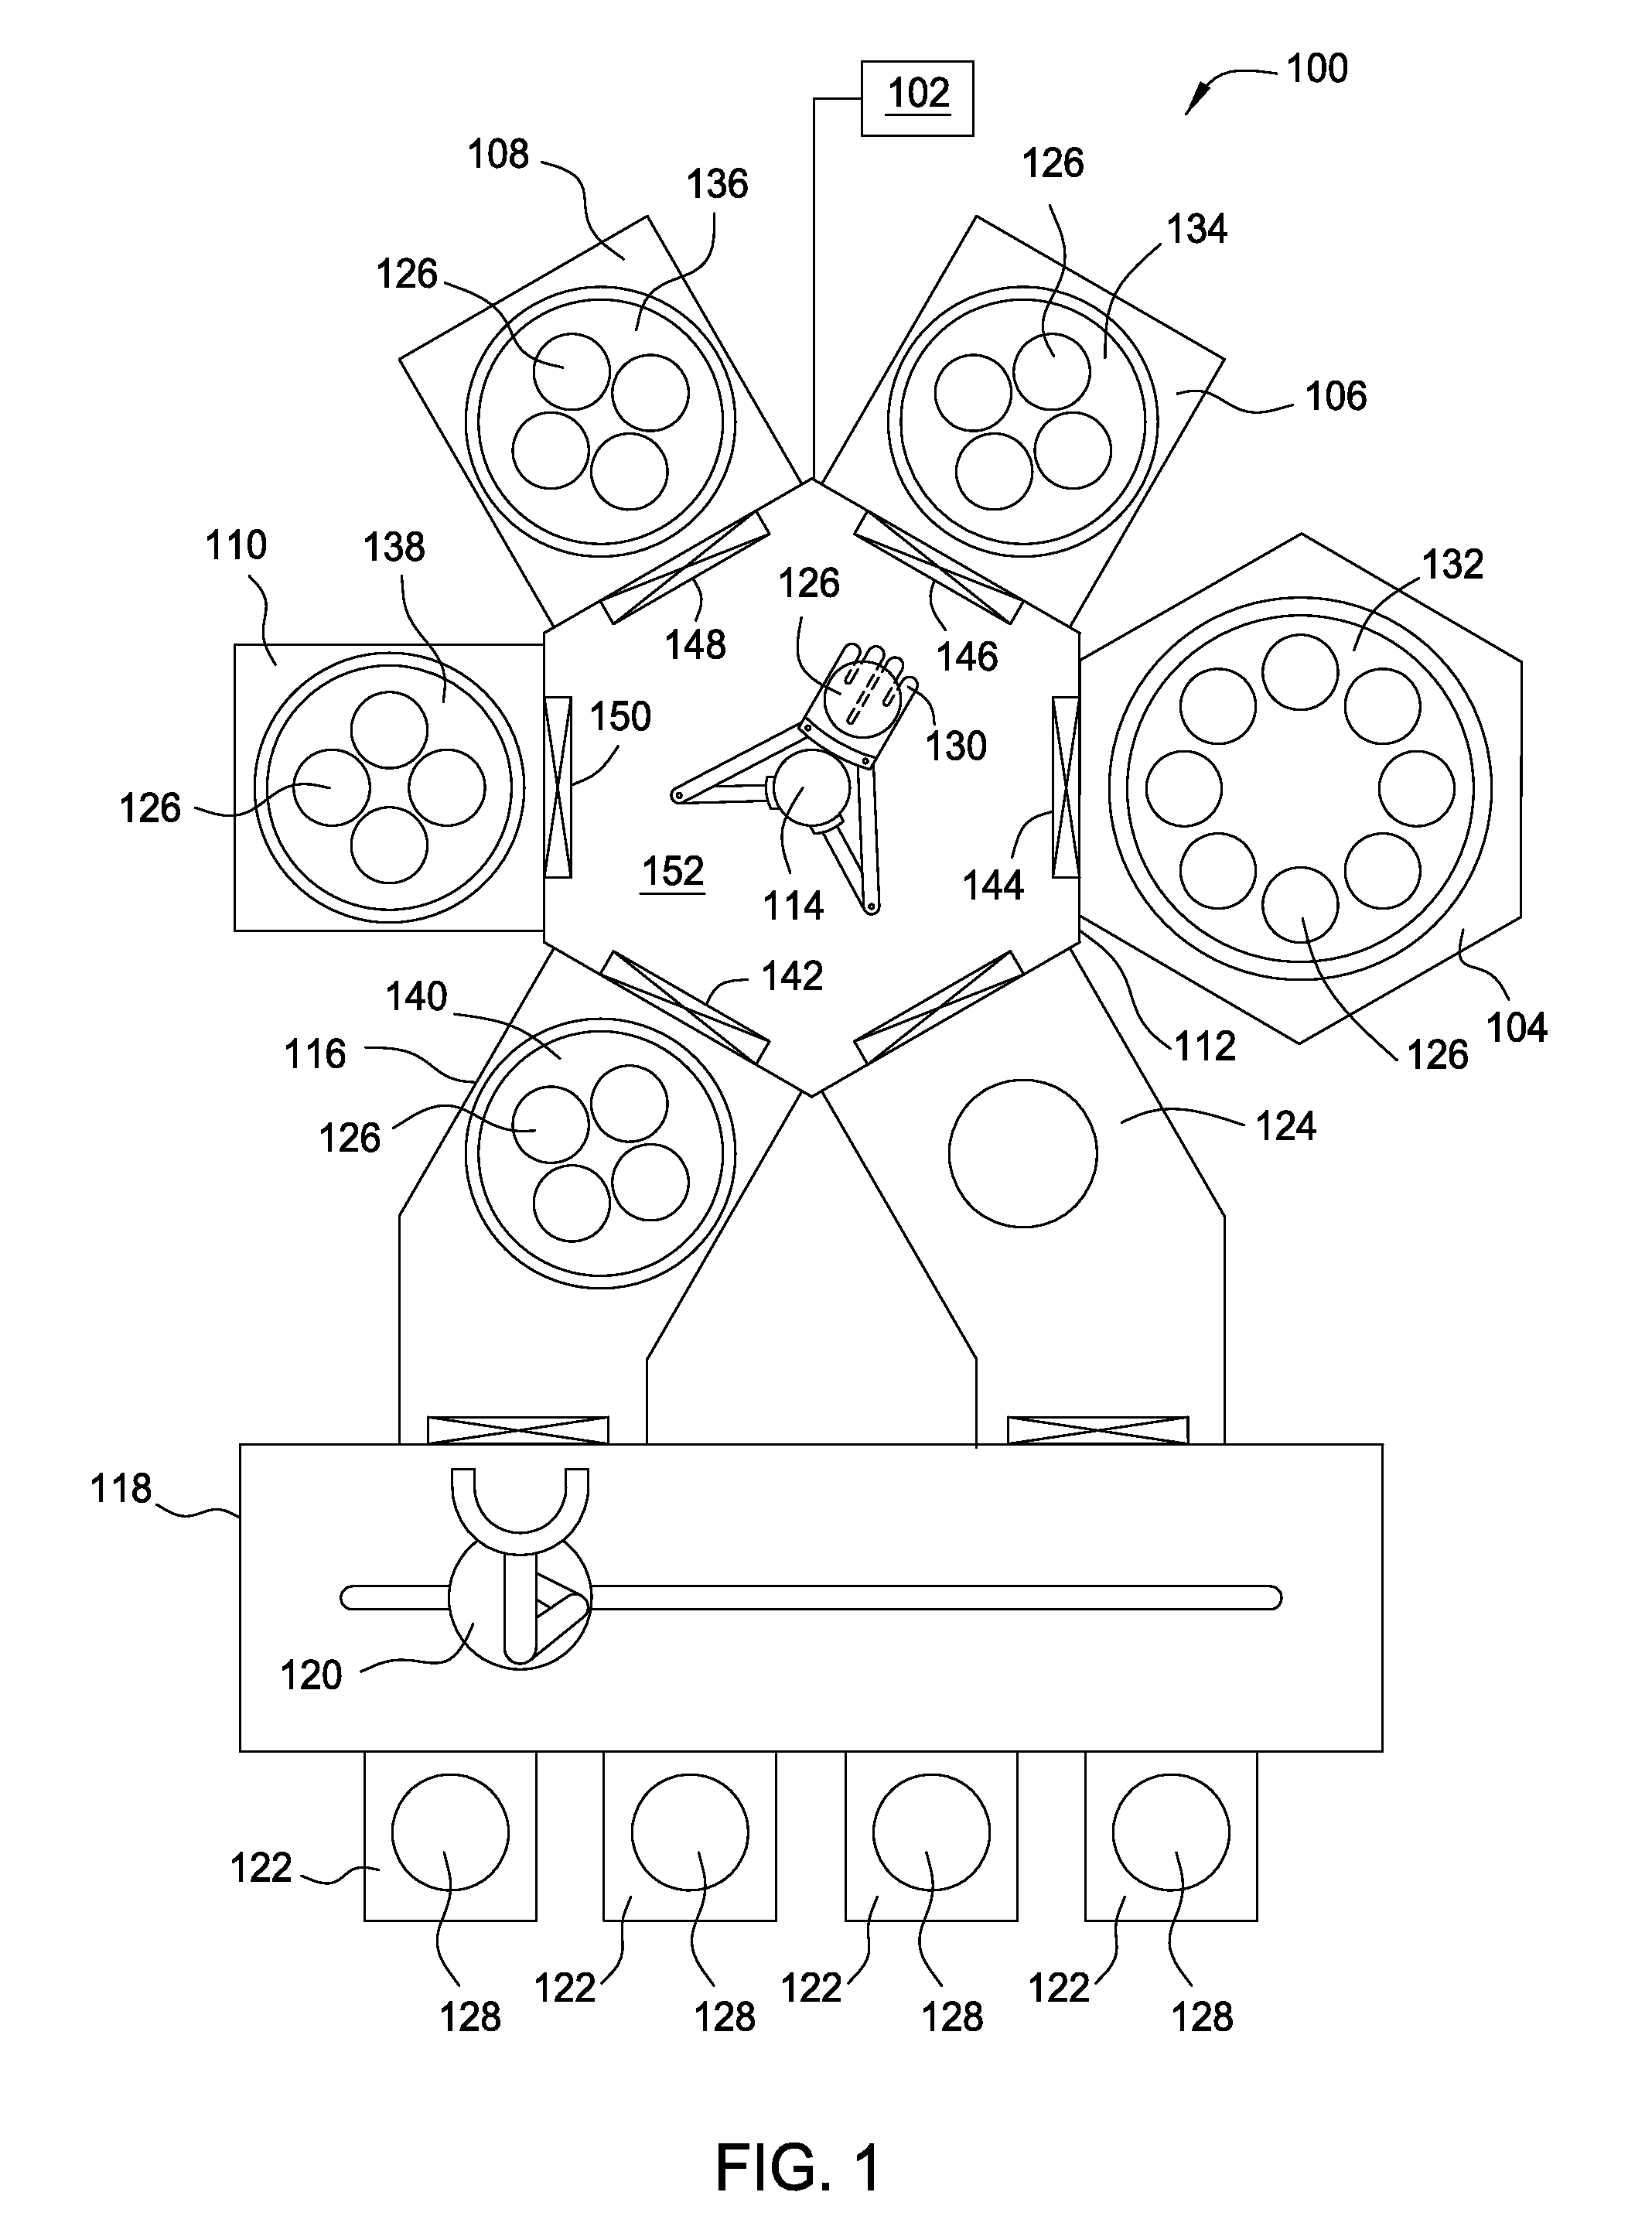 Segmented substrate loading for multiple substrate processing